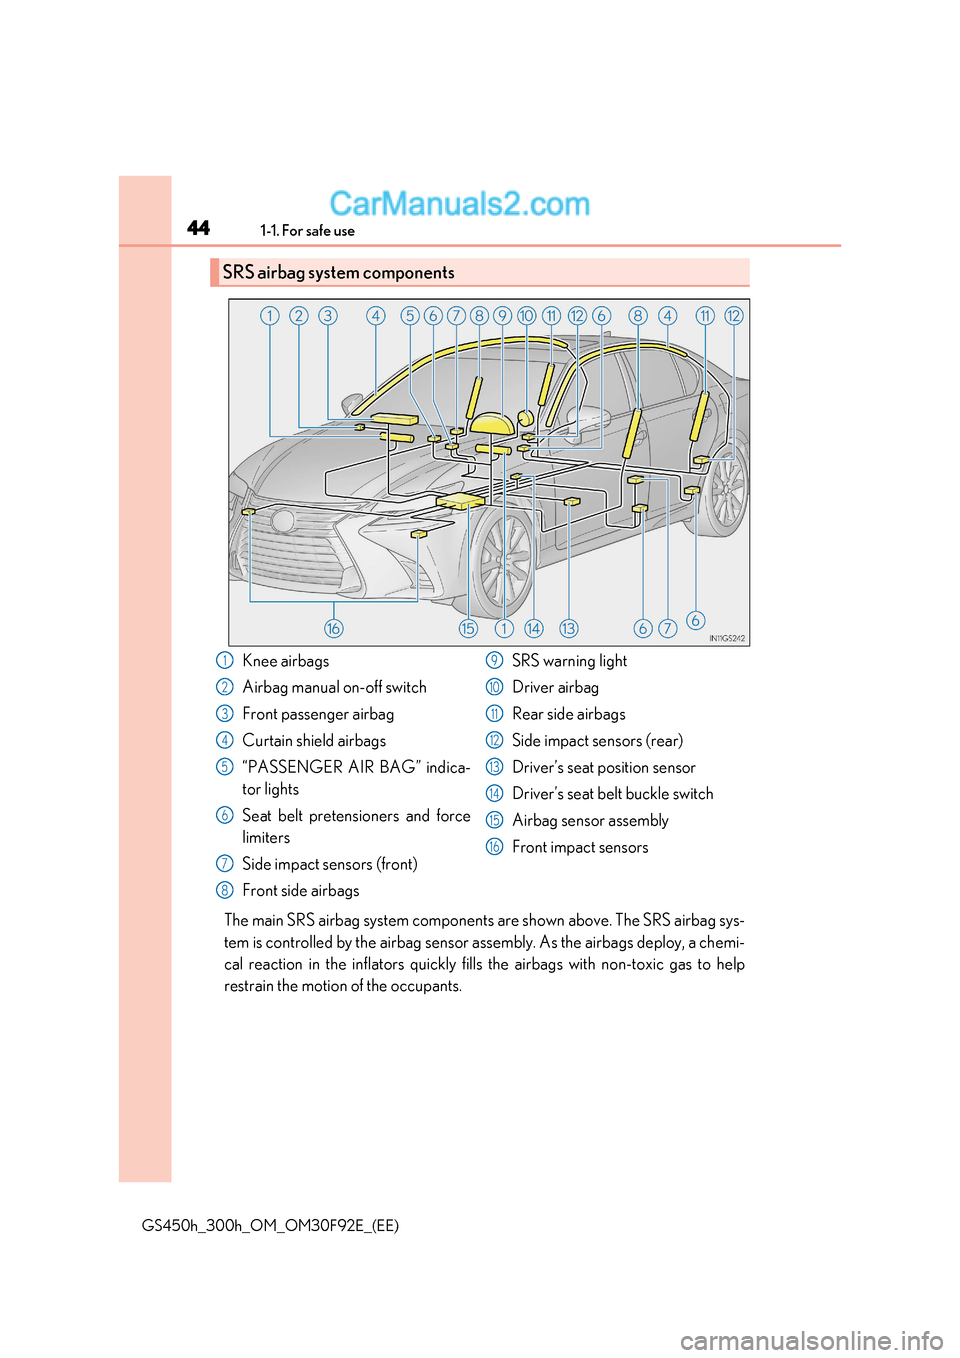 Lexus GS300h 2017  Owners Manual 441-1. For safe use
GS450h_300h_OM_OM30F92E_(EE) The main SRS airbag system components are shown above. The SRS airbag sys- 
tem is controlled by the airbag sensor assembly. As the airbags deploy, a c